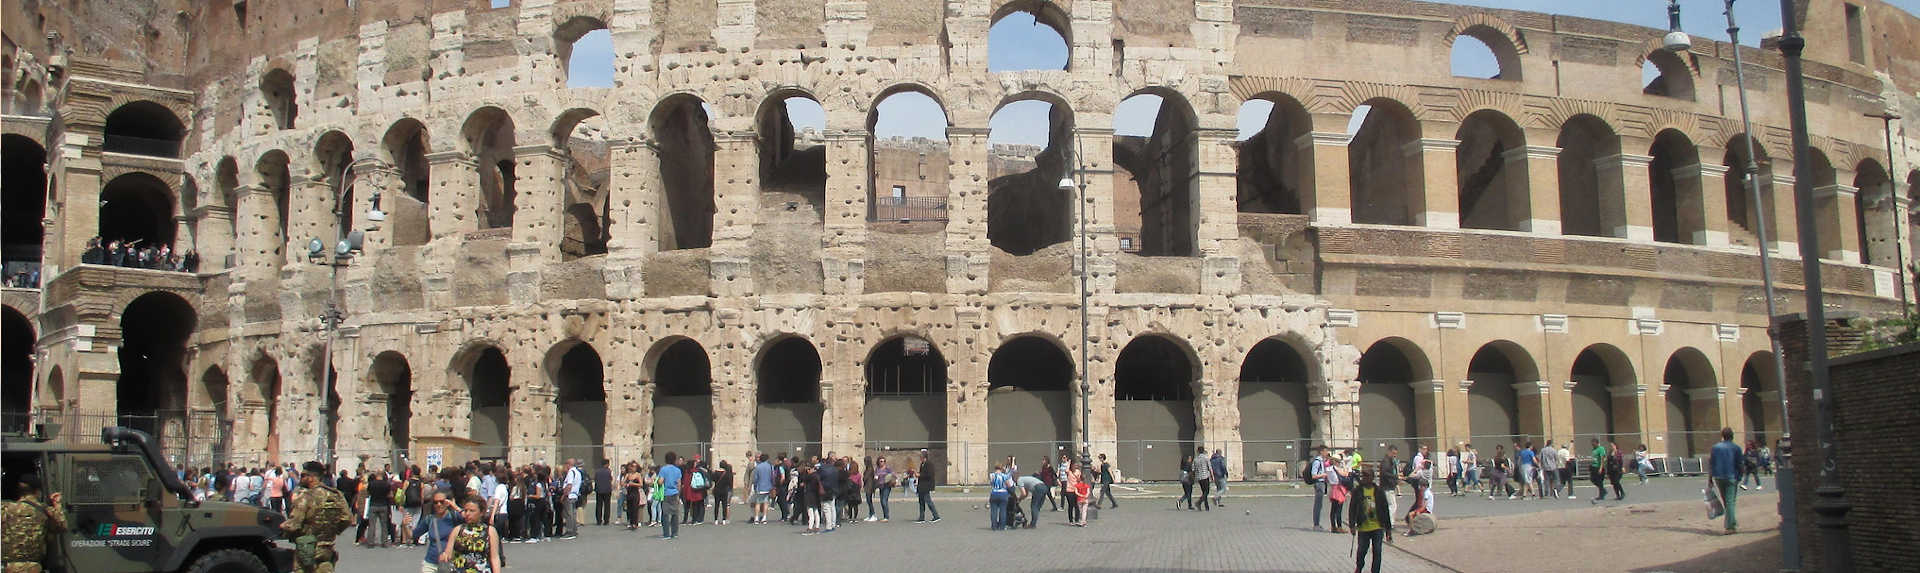 Why is the Colosseum in Rome famous?